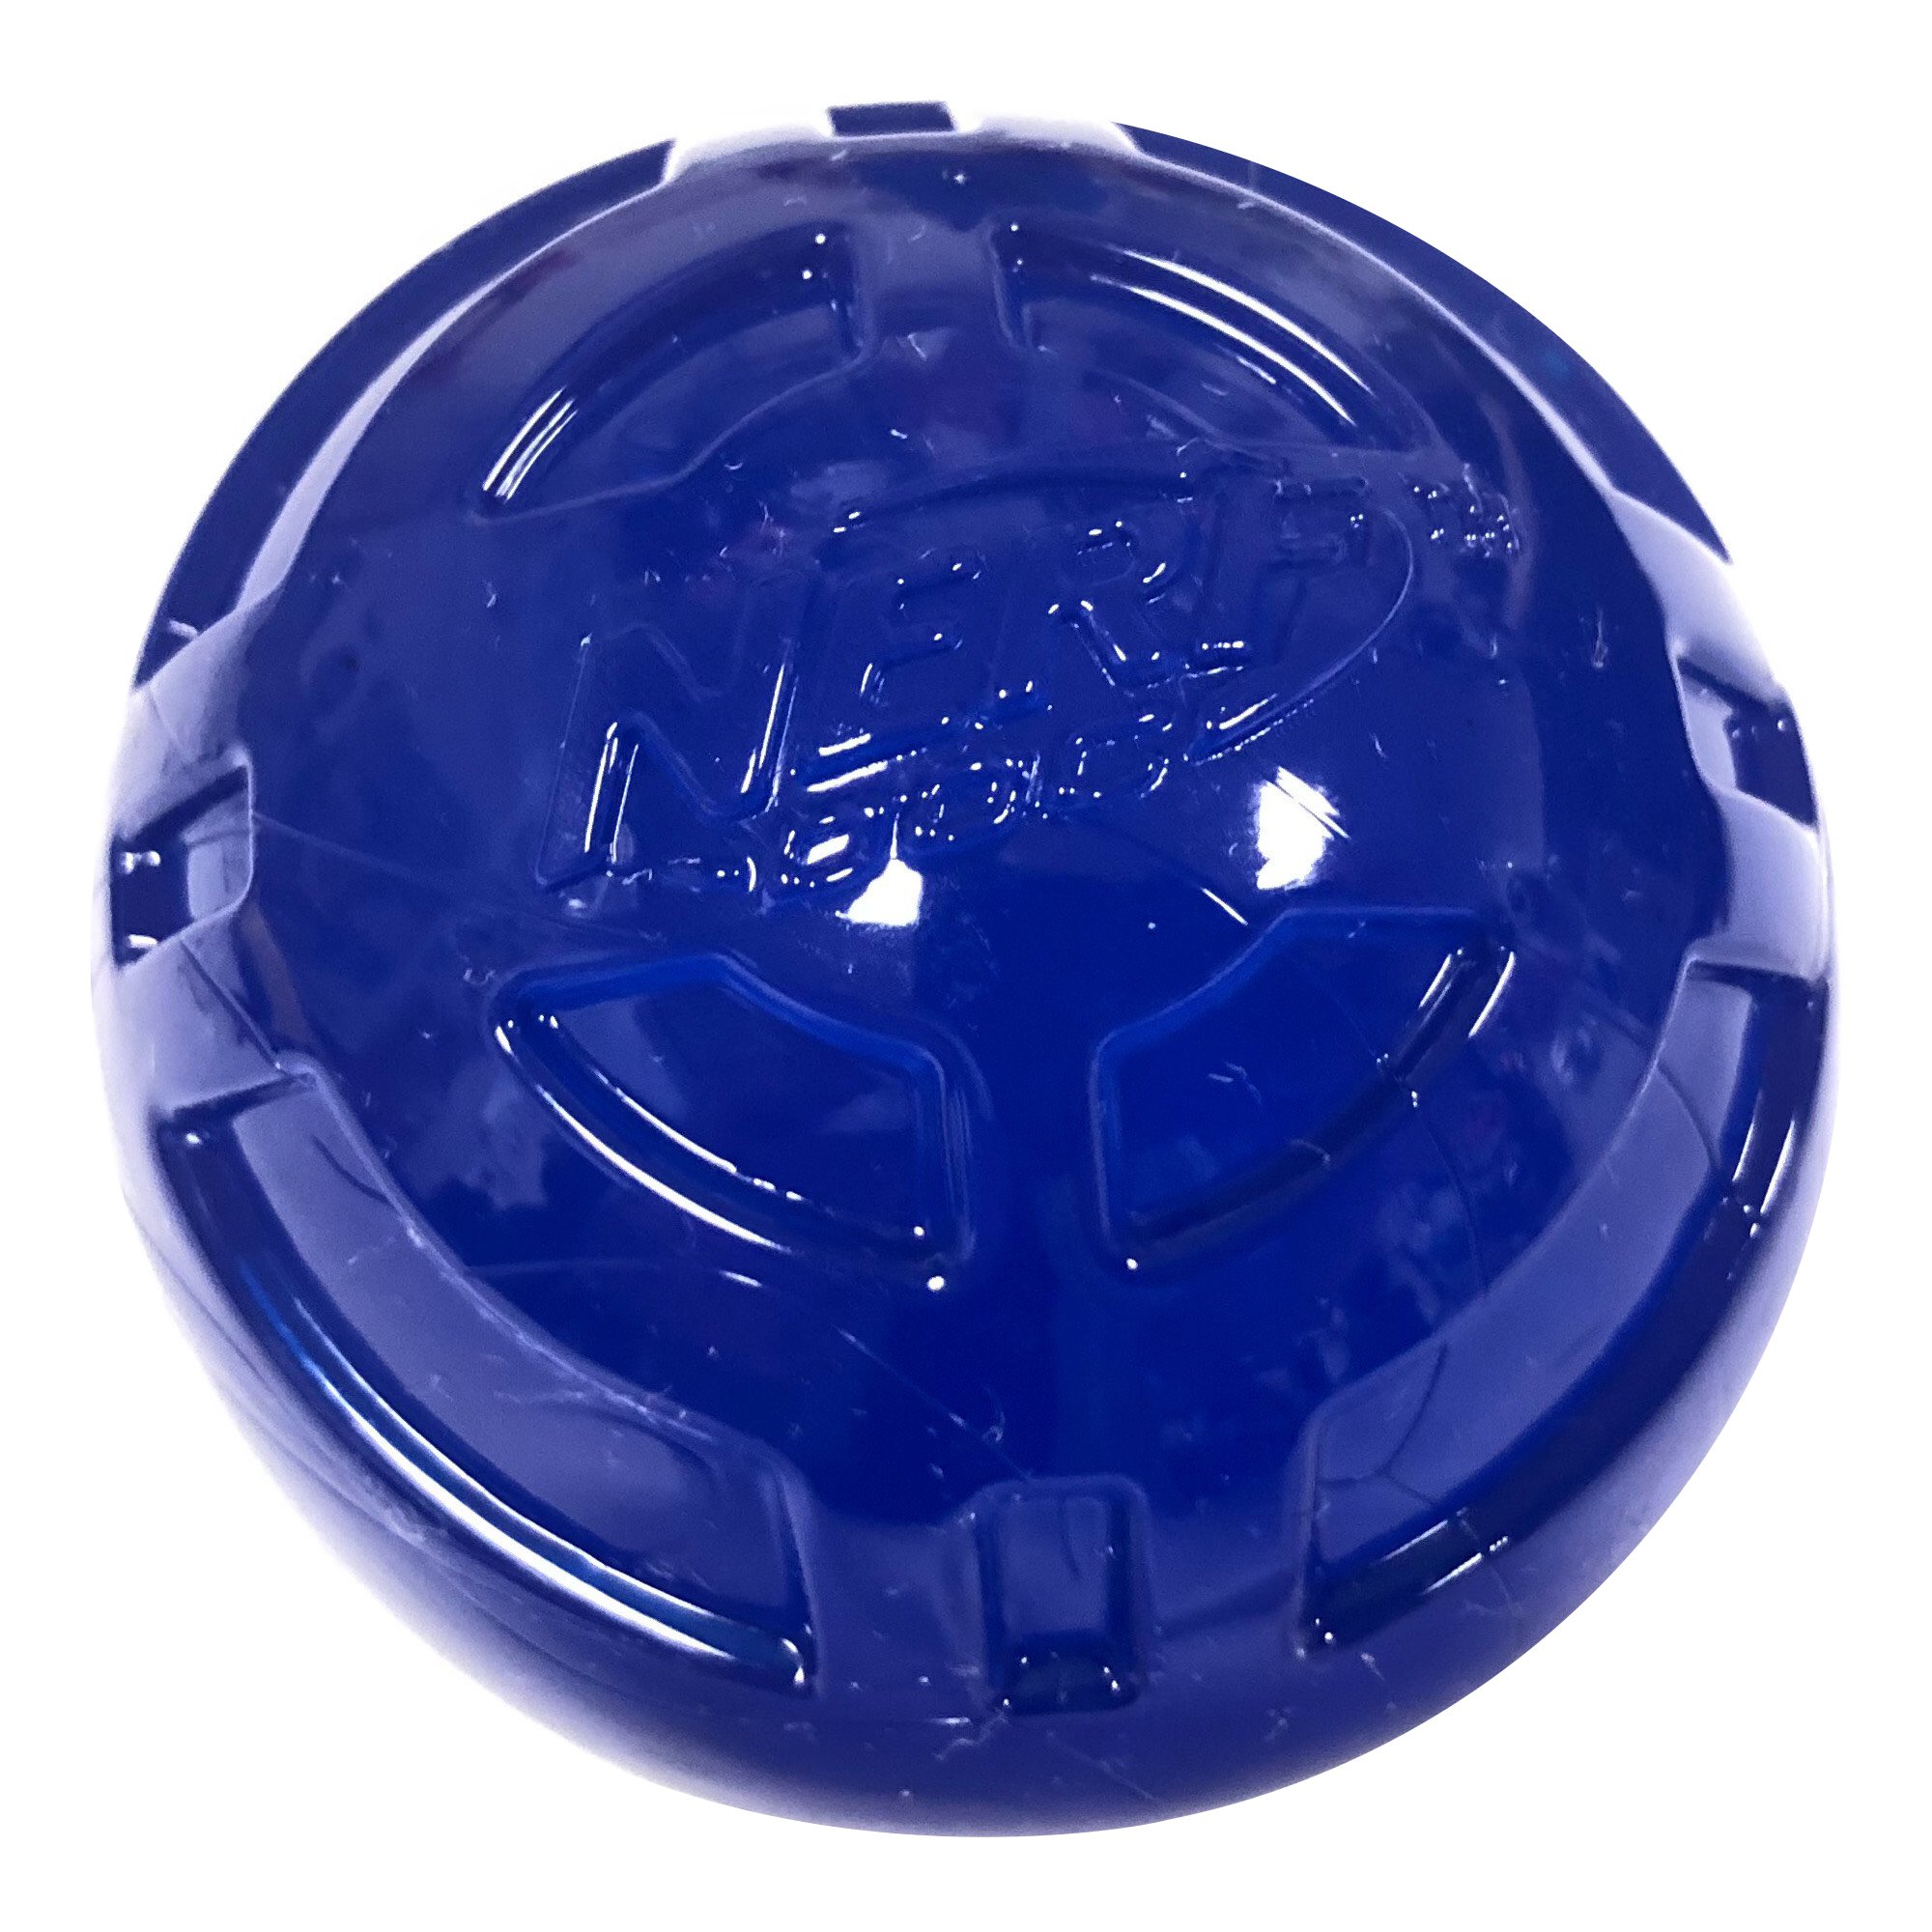 UPC 846998038812 product image for Nerf Ultra Tough Thermoplastic Rubber Ball for Dogs, Medium | upcitemdb.com